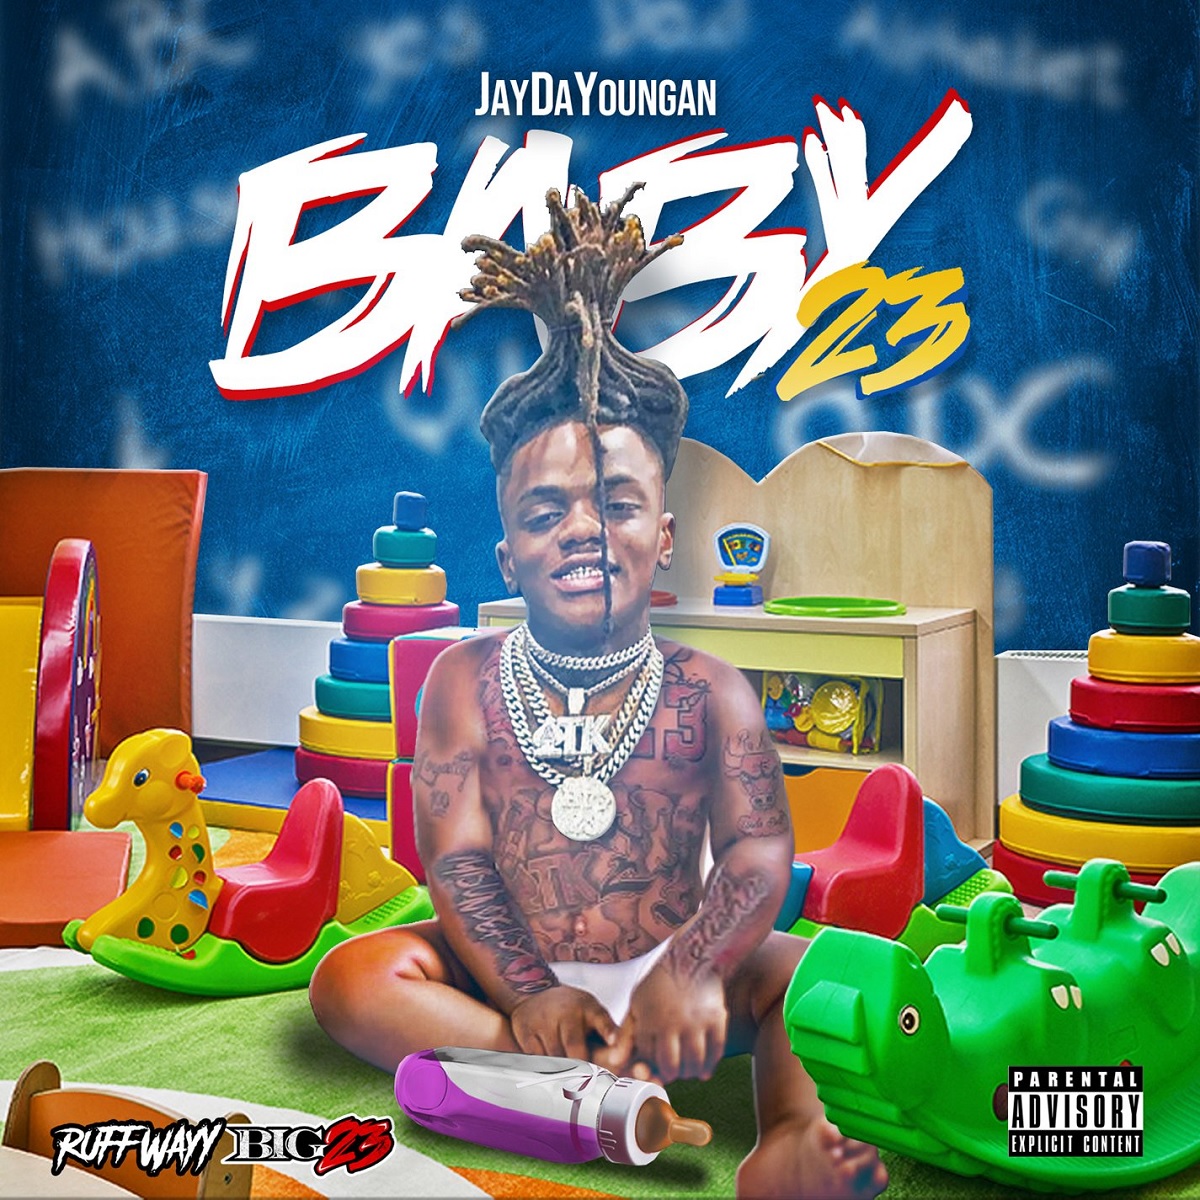 JayDaYoungan releases his debut album, "Baby23," featuring appearances from Kevin Gates, Moneybagg Yo, Mulatto, and more.